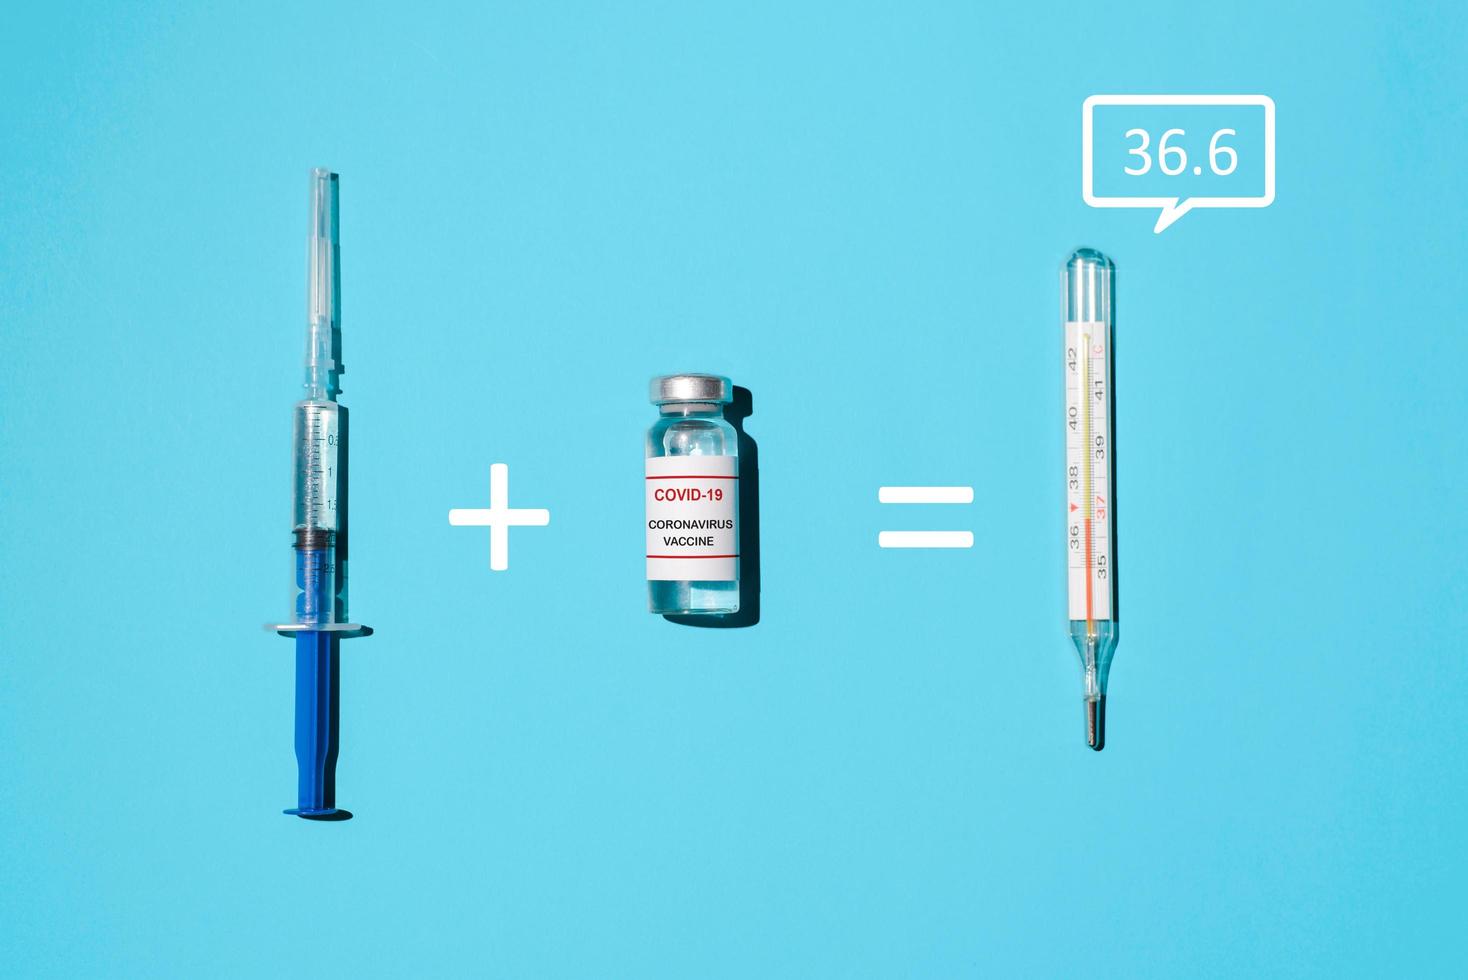 Syringe, covid-19 vaccine and thermometer on a blue background, flat lay. Concept math example syringe plus vaccination equals normal temperature photo